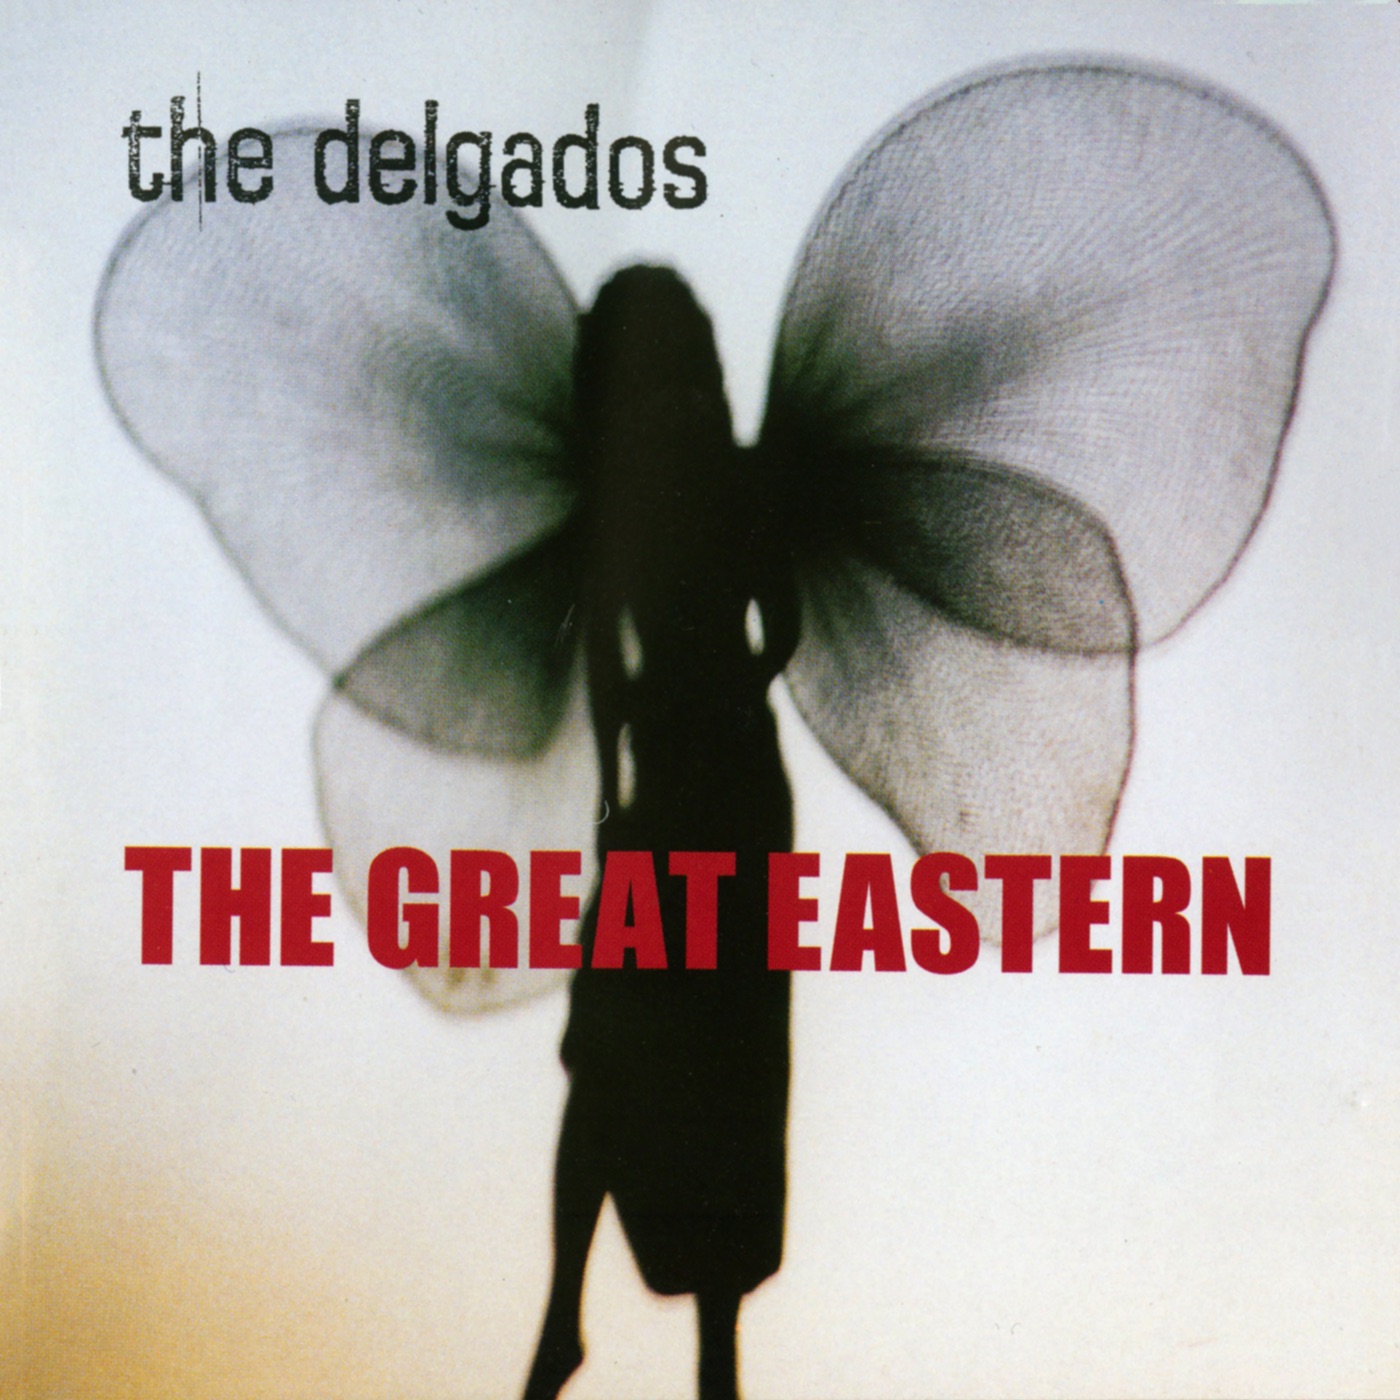 The Great Eastern by The Delgados